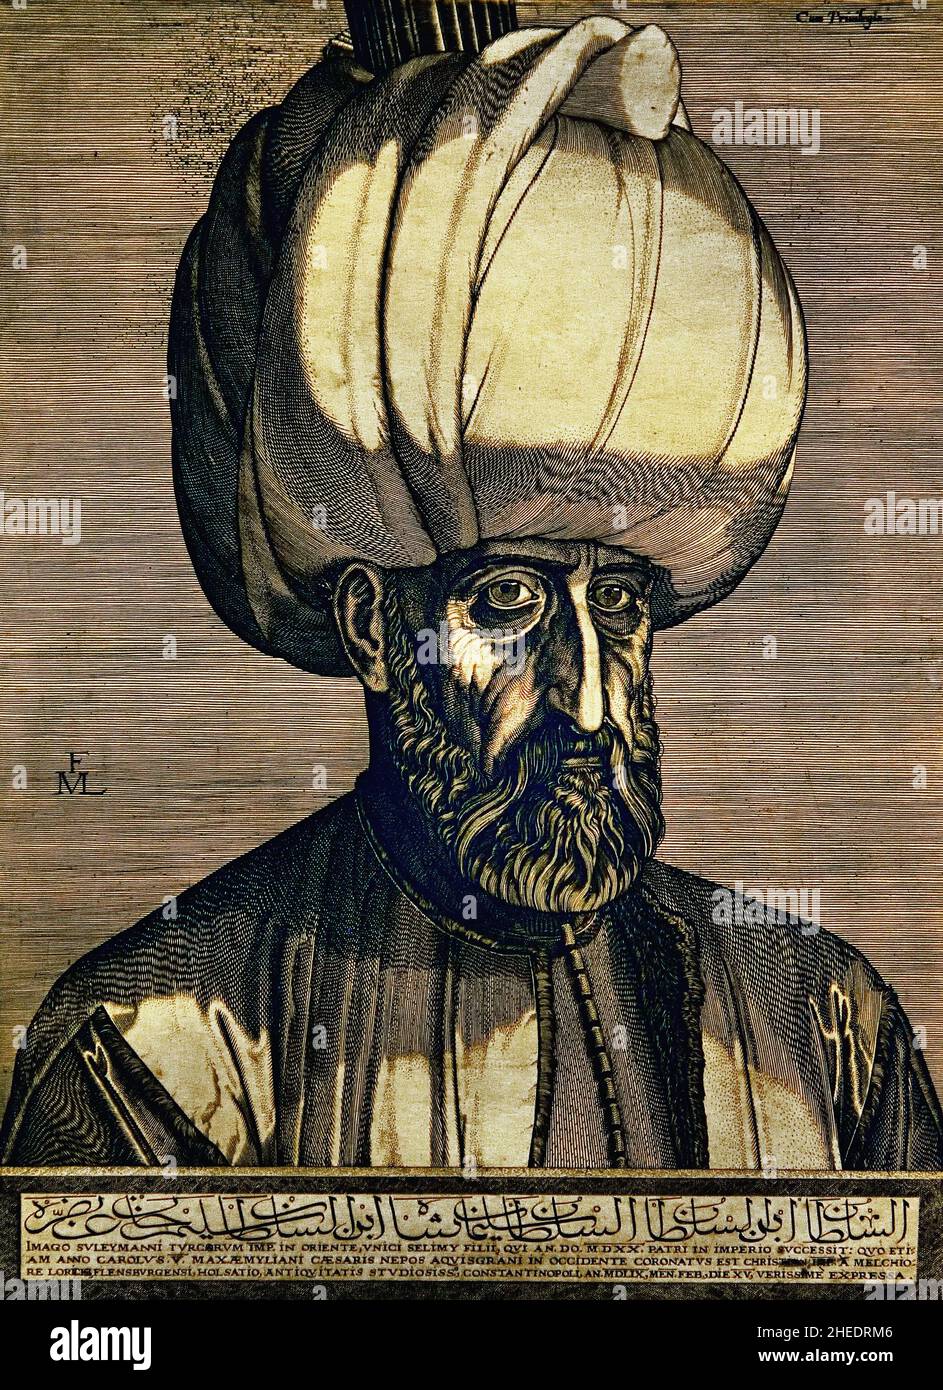 Portrait of Sultan Suleyman the Magnificent  by Melchior Lorck. Melchior Lorichs  1526-1598 (Suleiman I, commonly known as Suleiman the Magnificent in the West and Suleiman the Lawgiver in his realm, was the tenth and longest-reigning Sultan of the Ottoman Empire from 1520 until his death in 1566.) Stock Photo